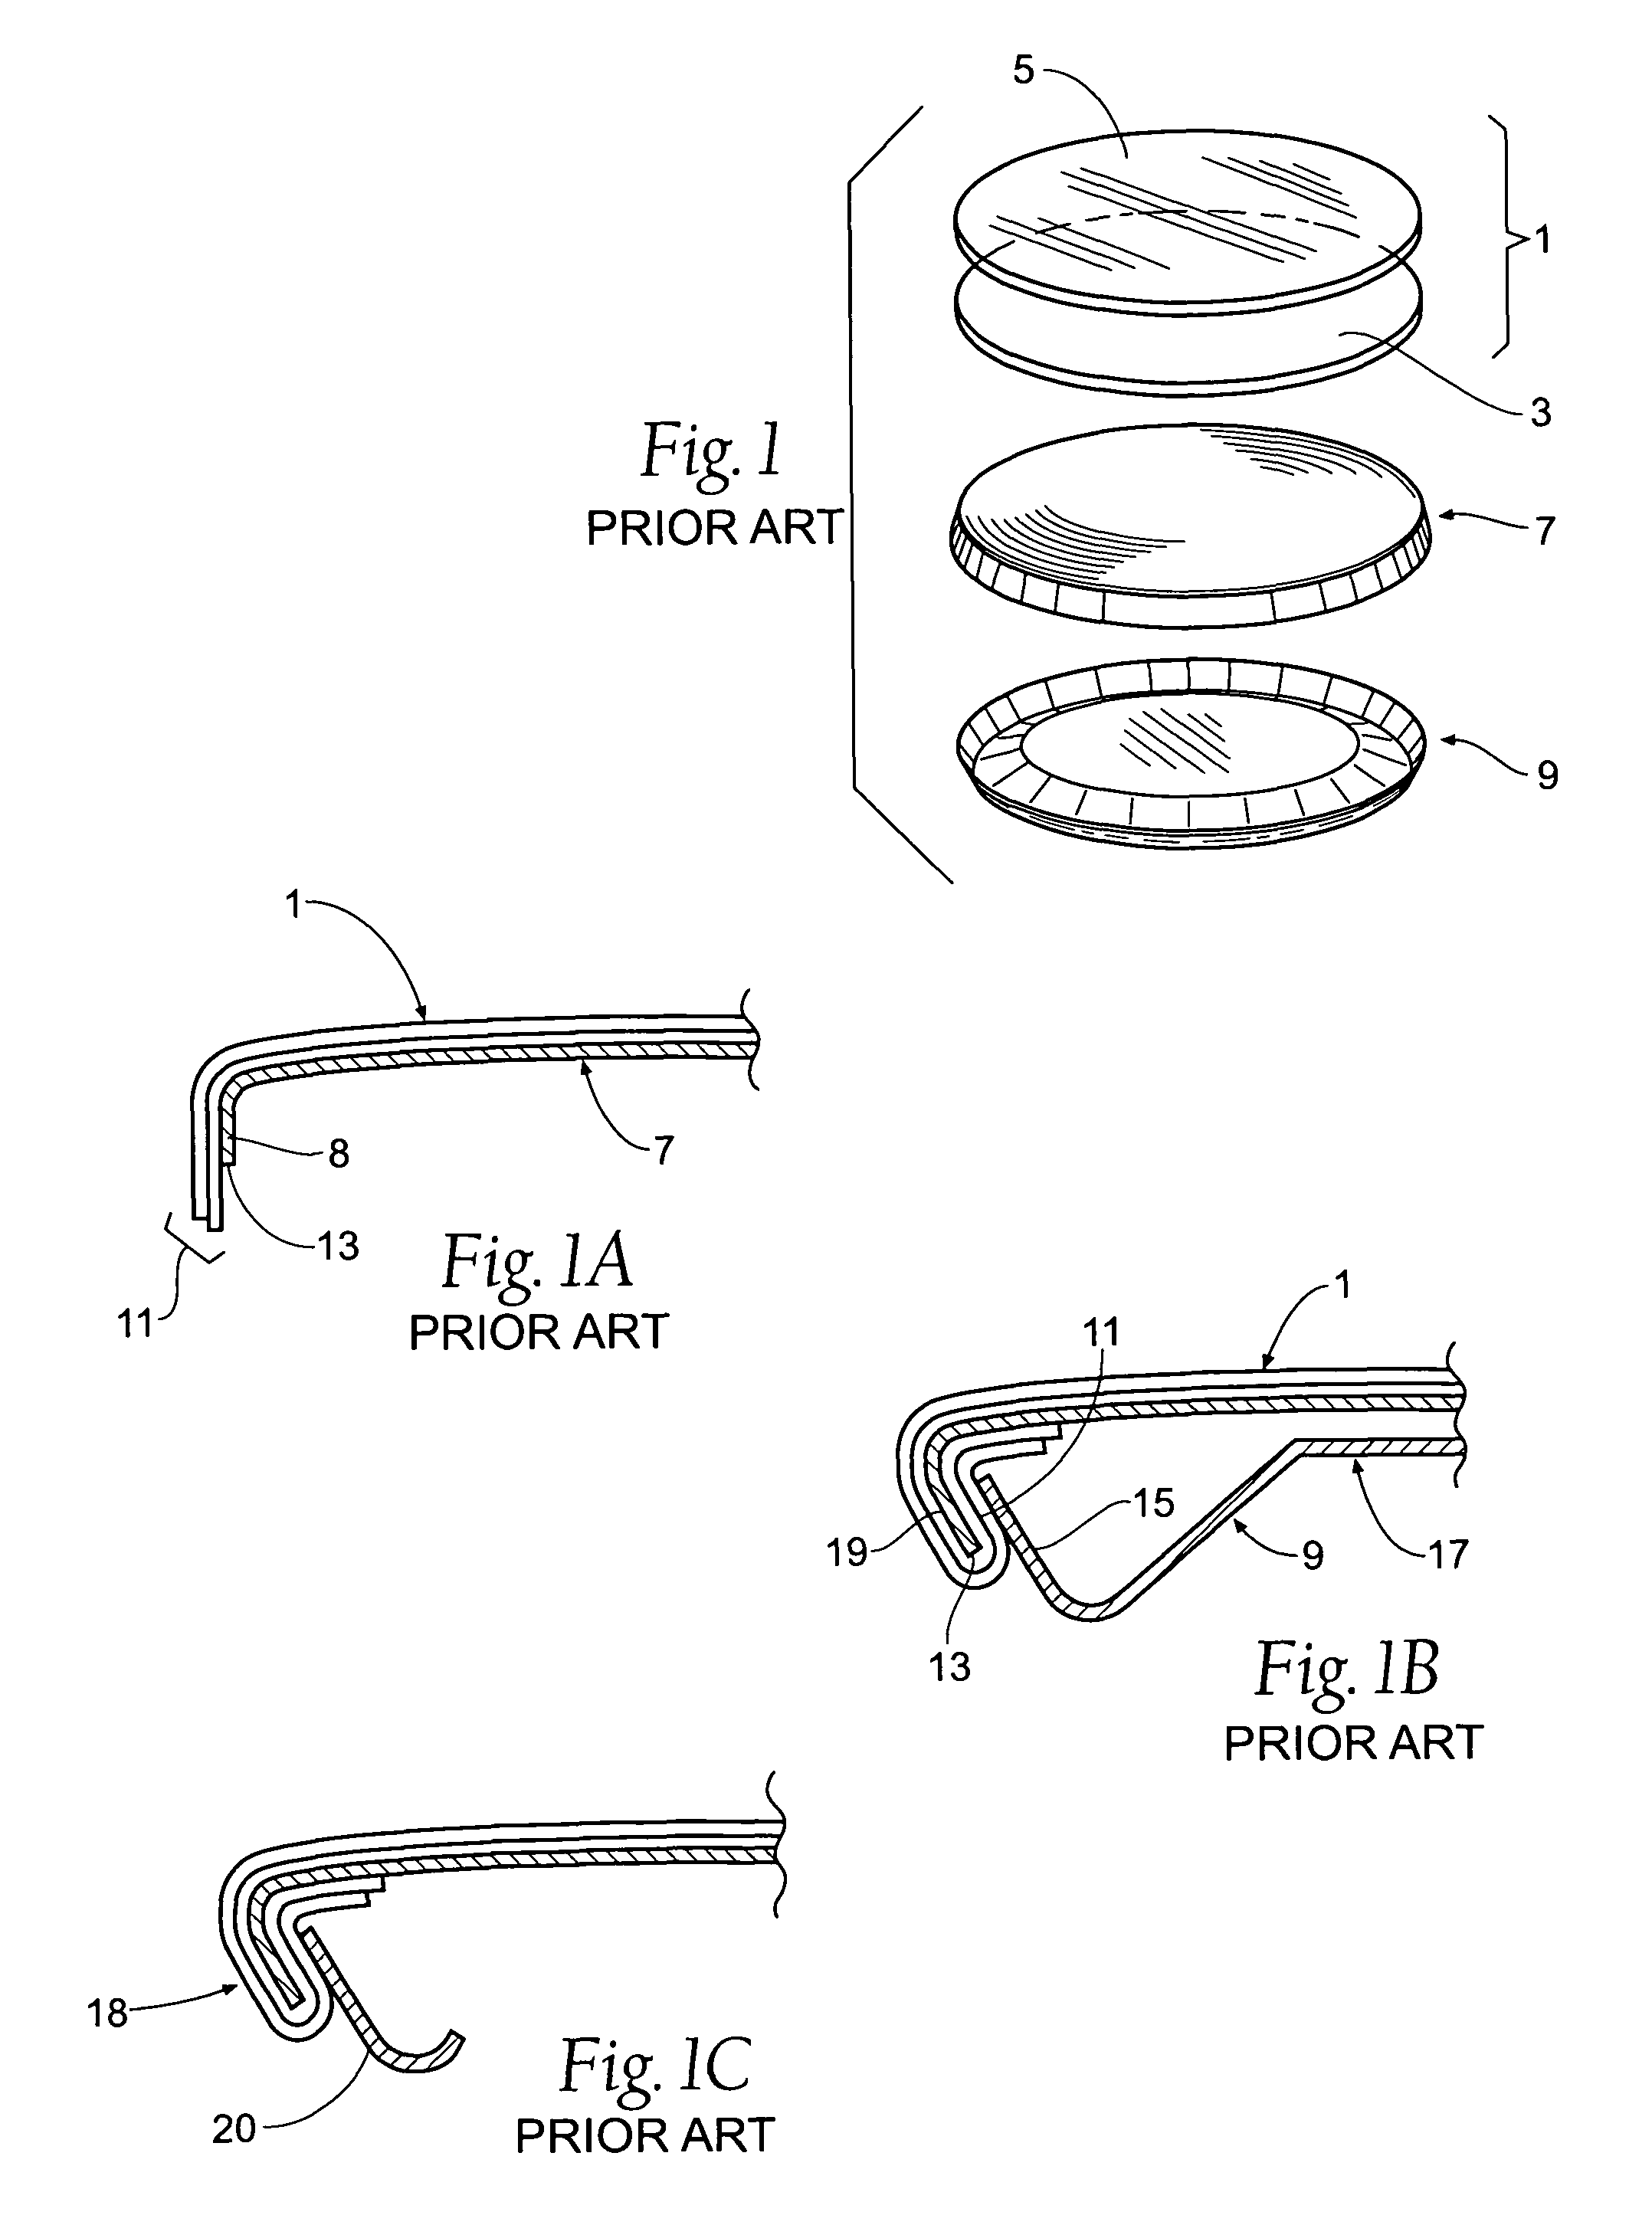 Button engaging and attachment apparatus and methods related applications